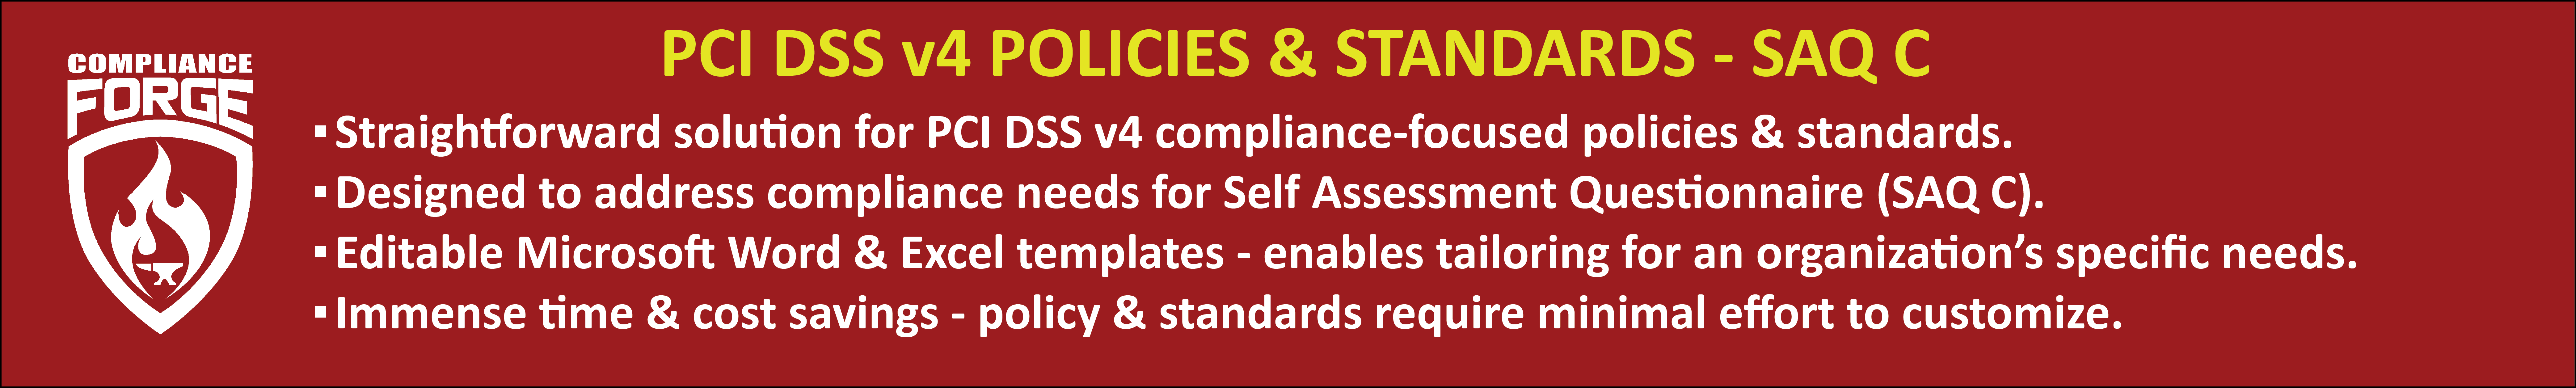 PCI DSS v4 SAQ C policies and standards example